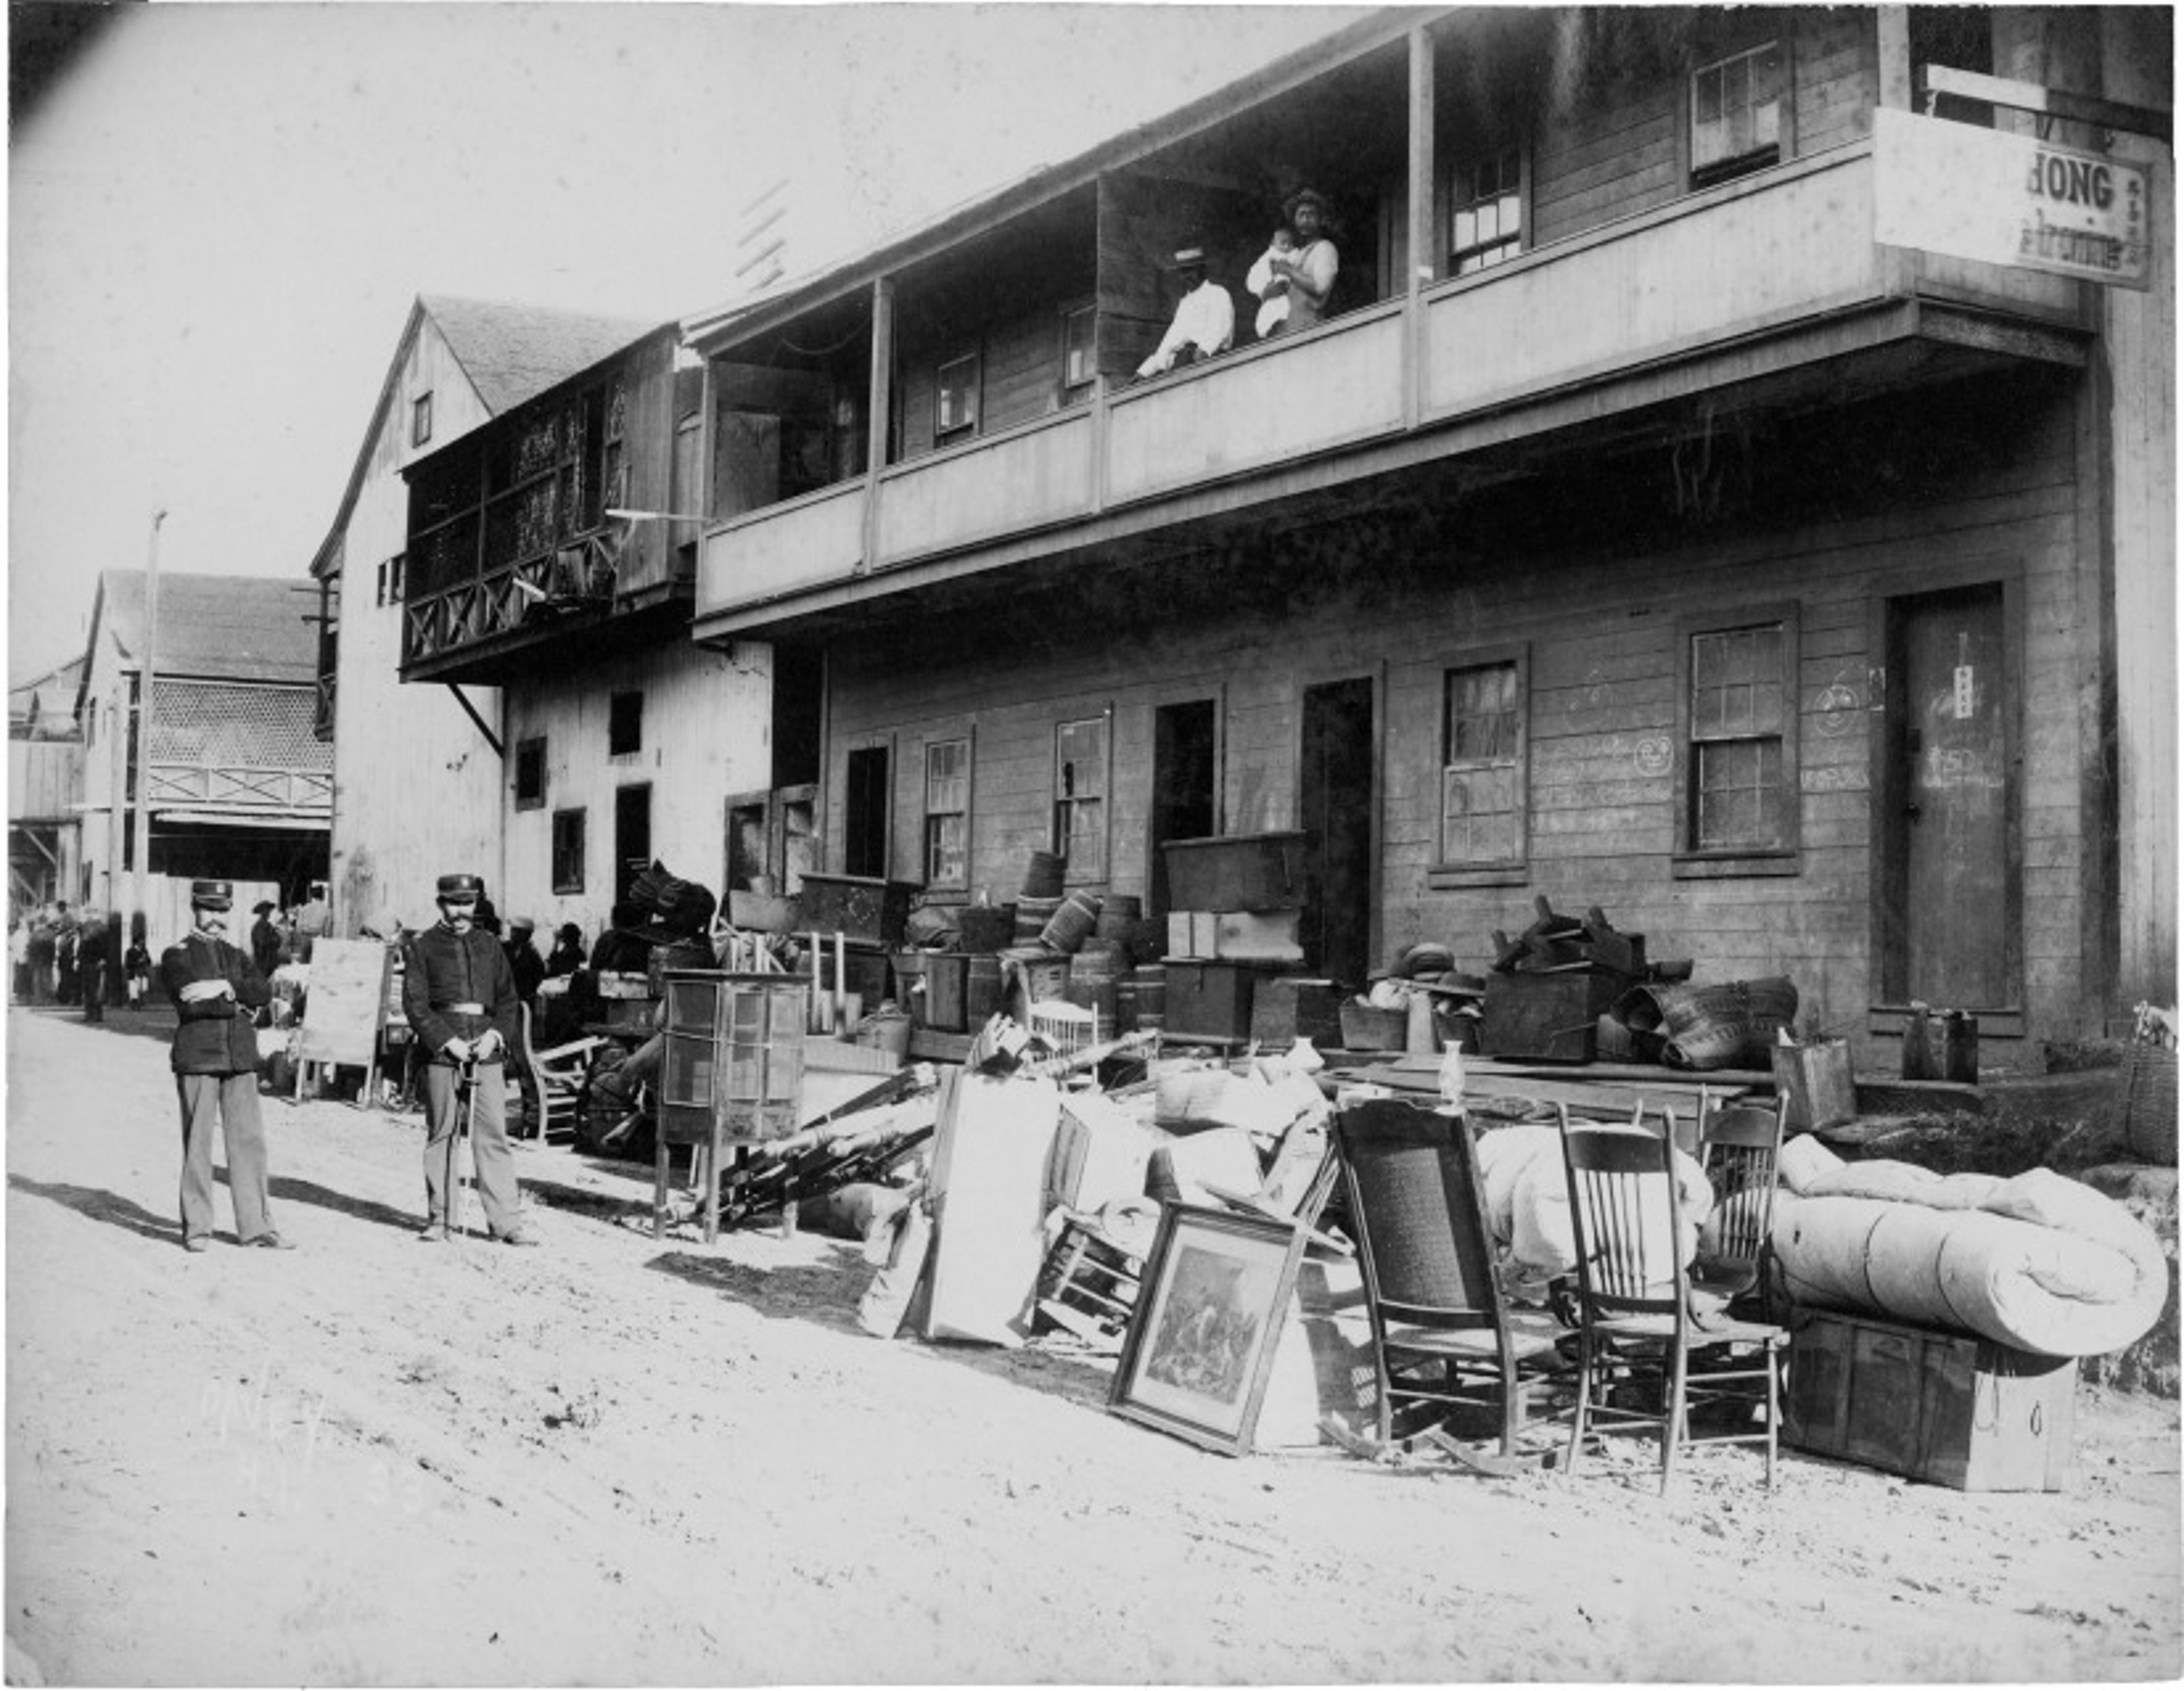 Photograph of a quarantine area in Honolulu's Chinatown